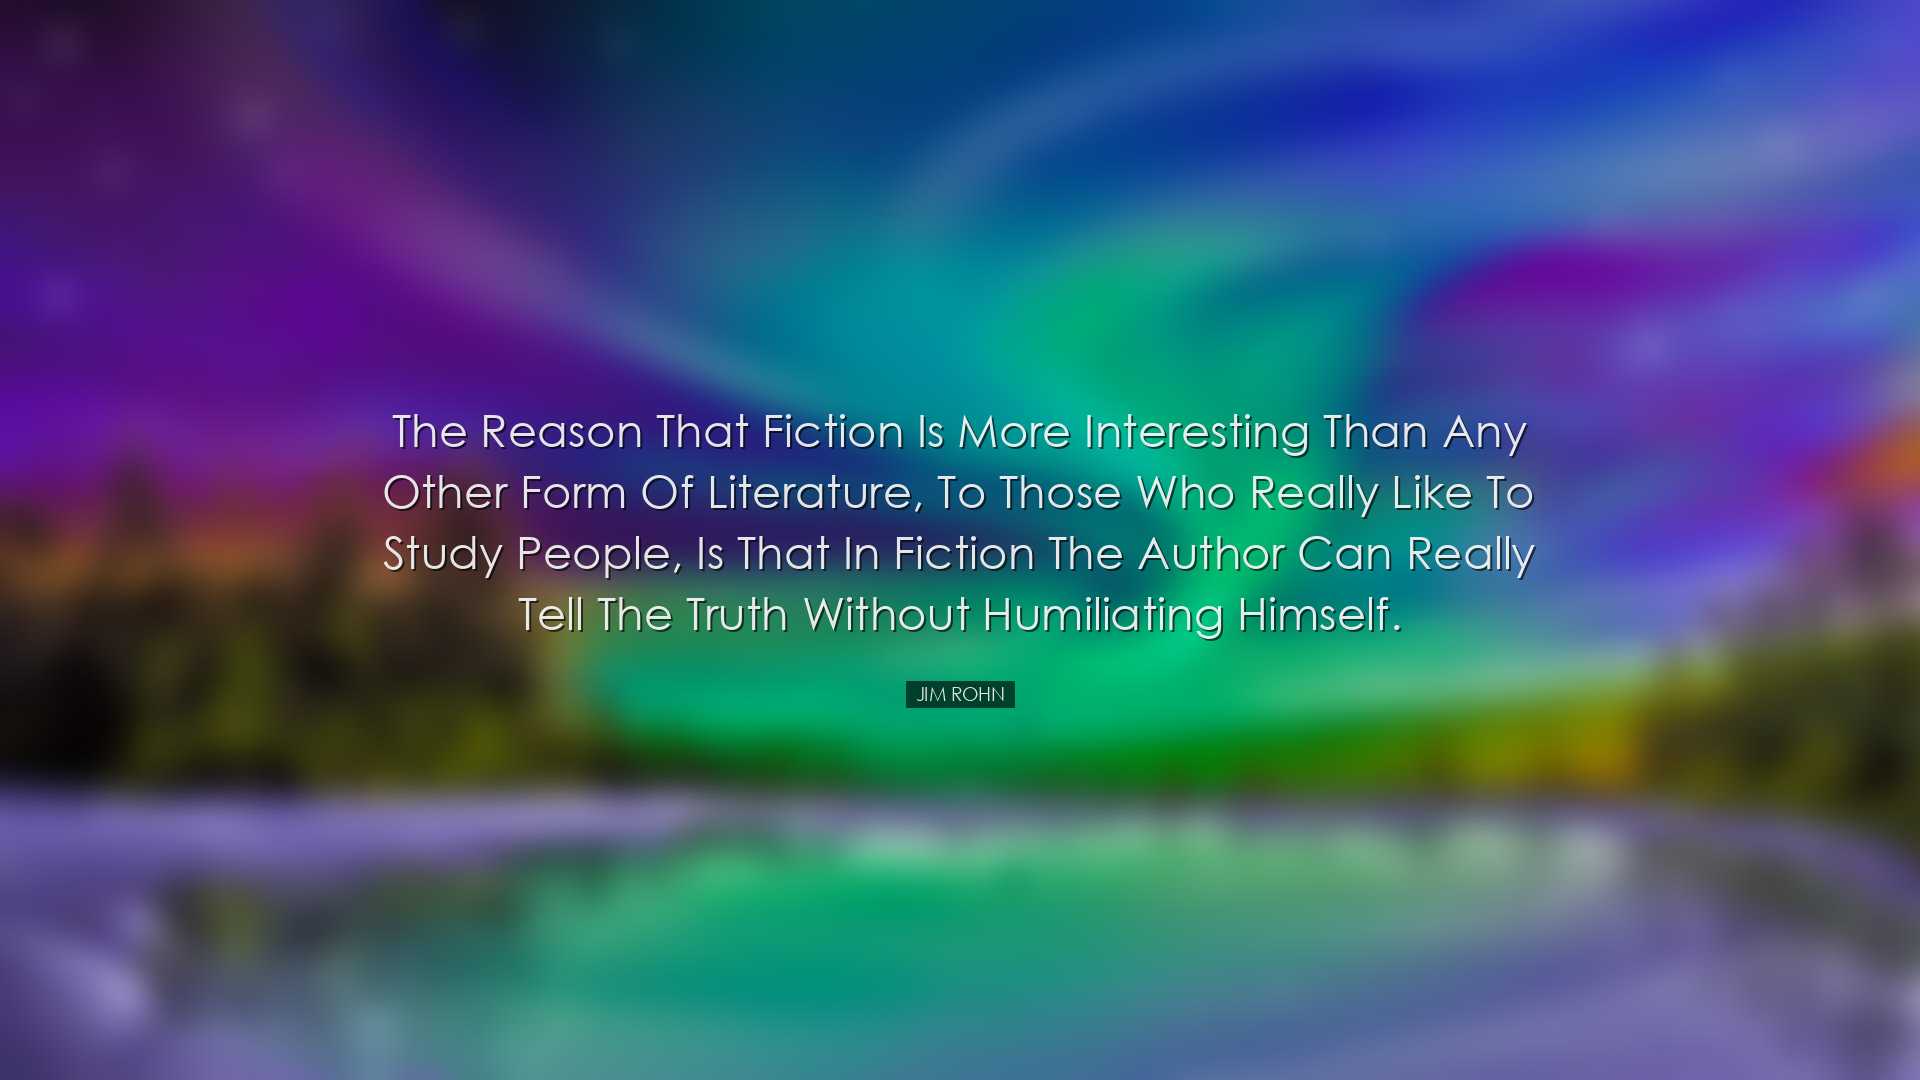 The reason that fiction is more interesting than any other form of